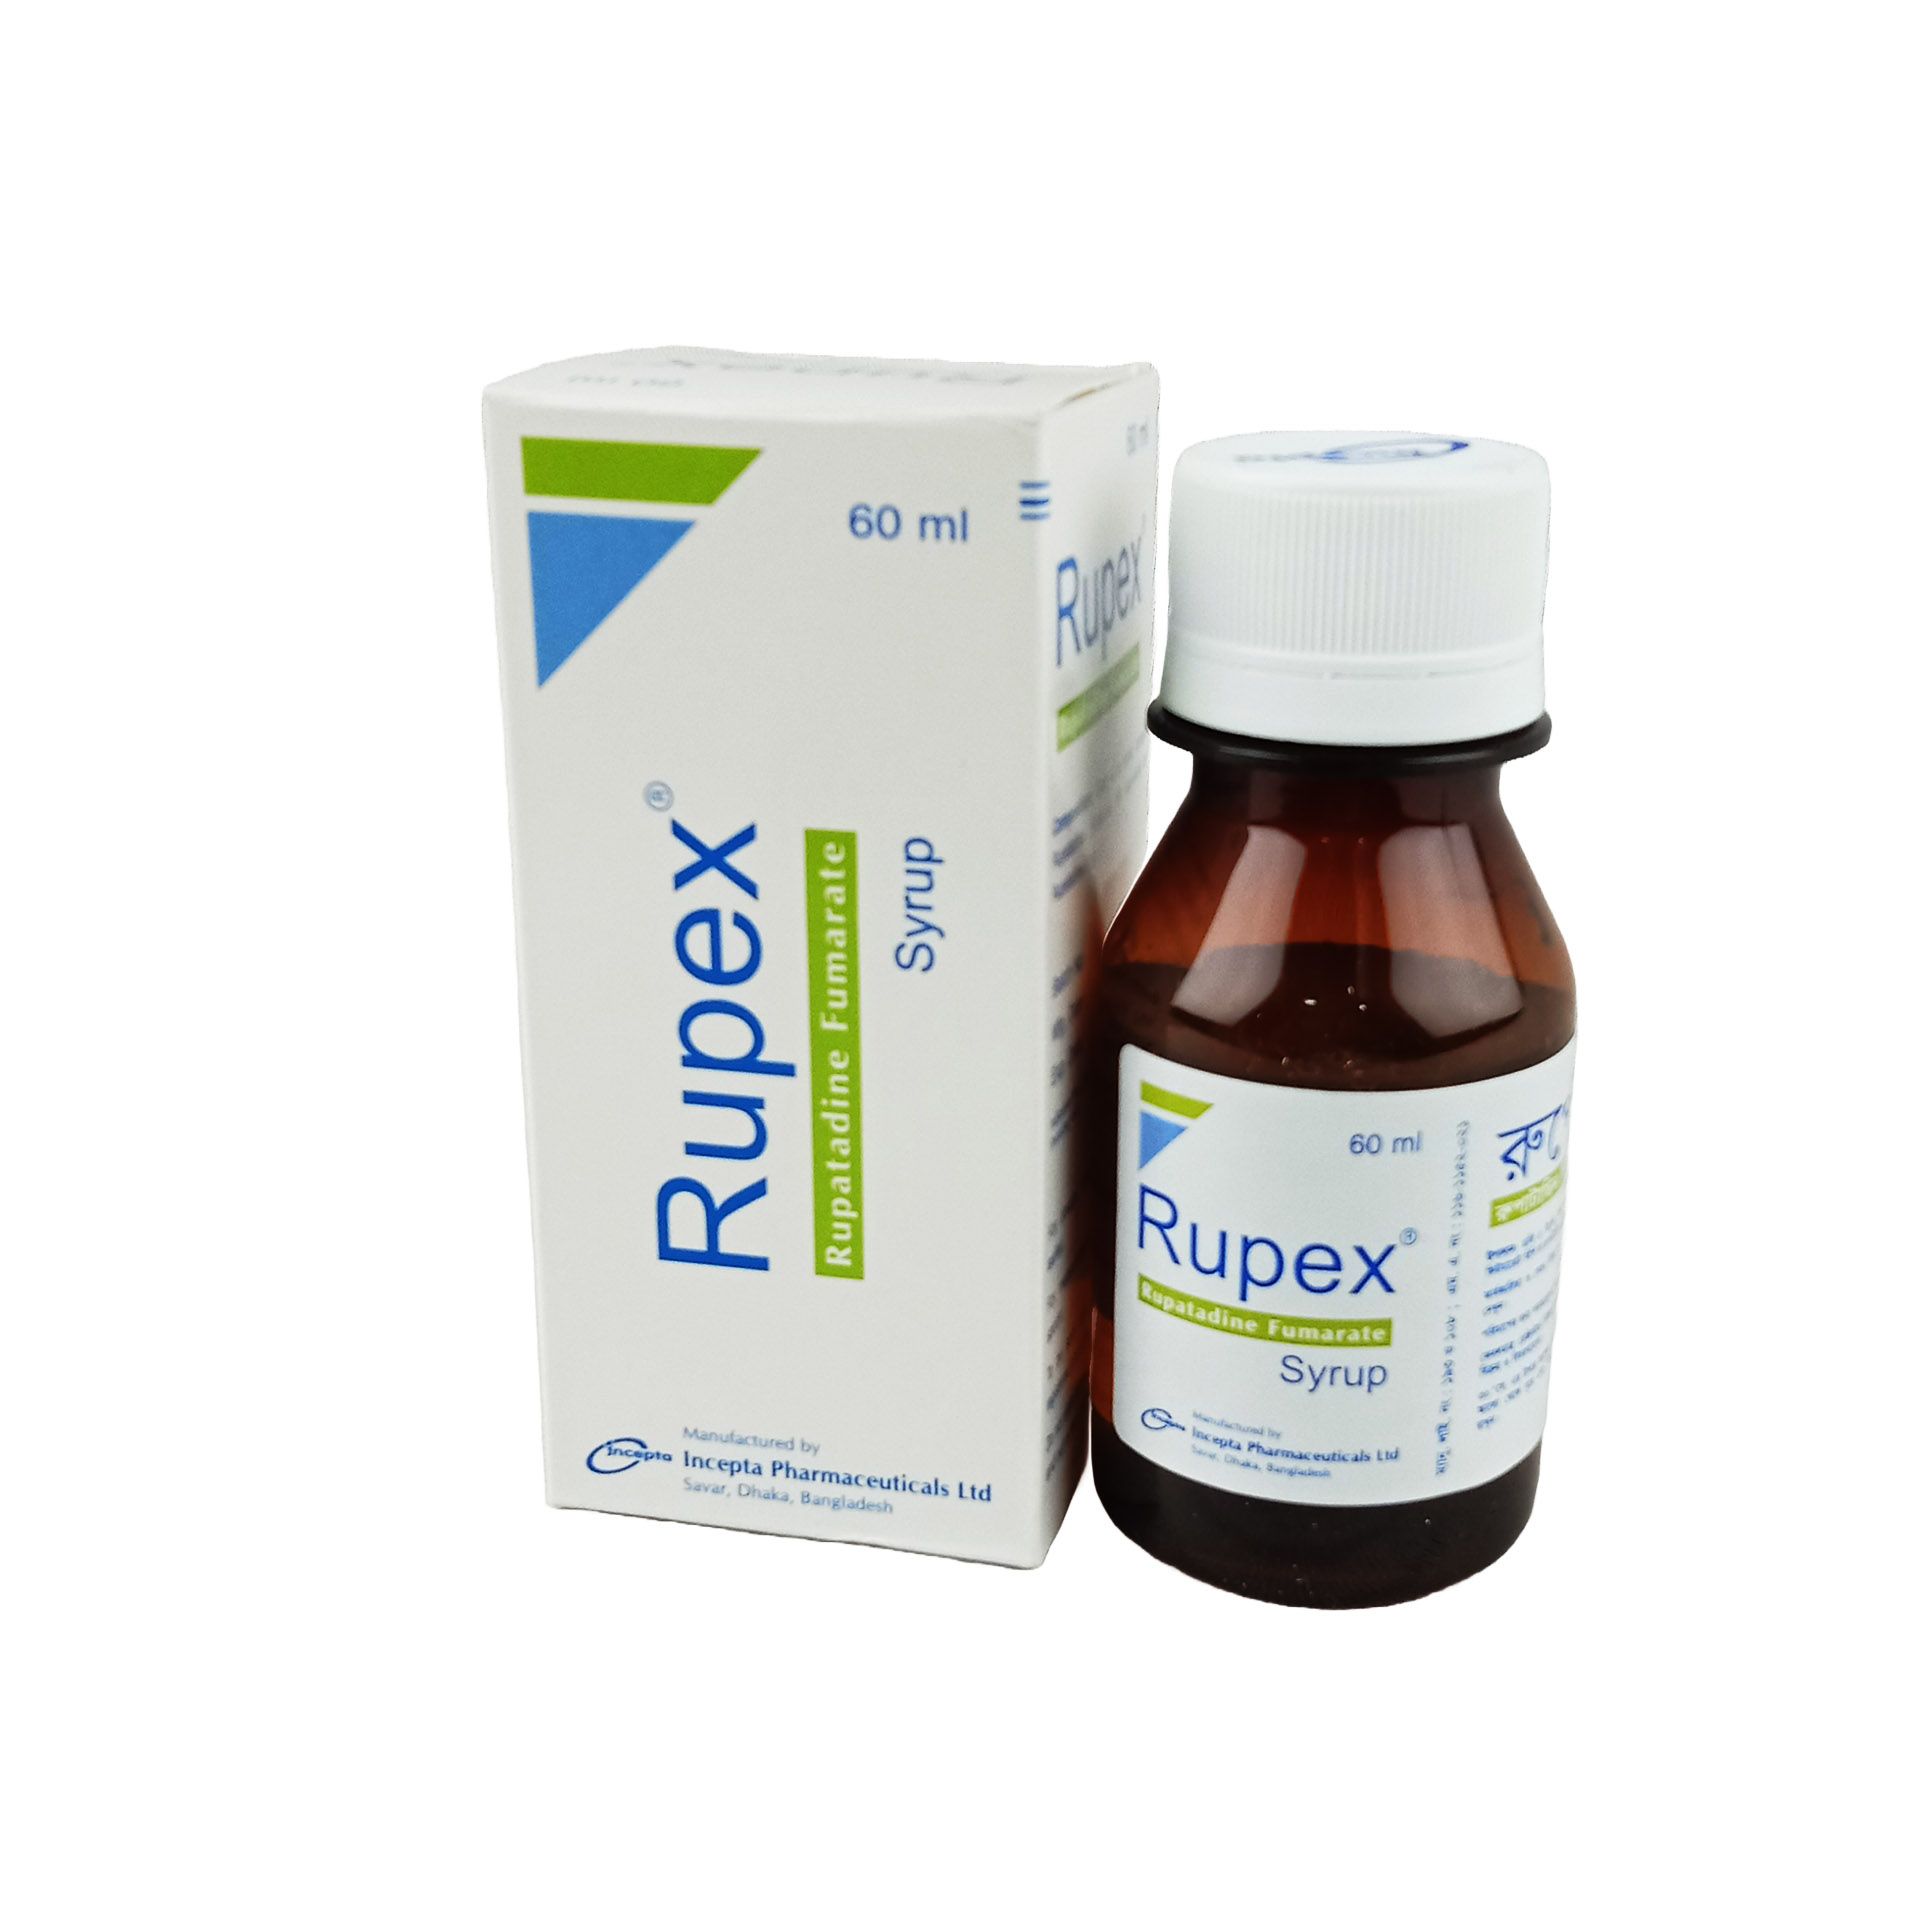 Rupex 5mg/5ml Oral Solution